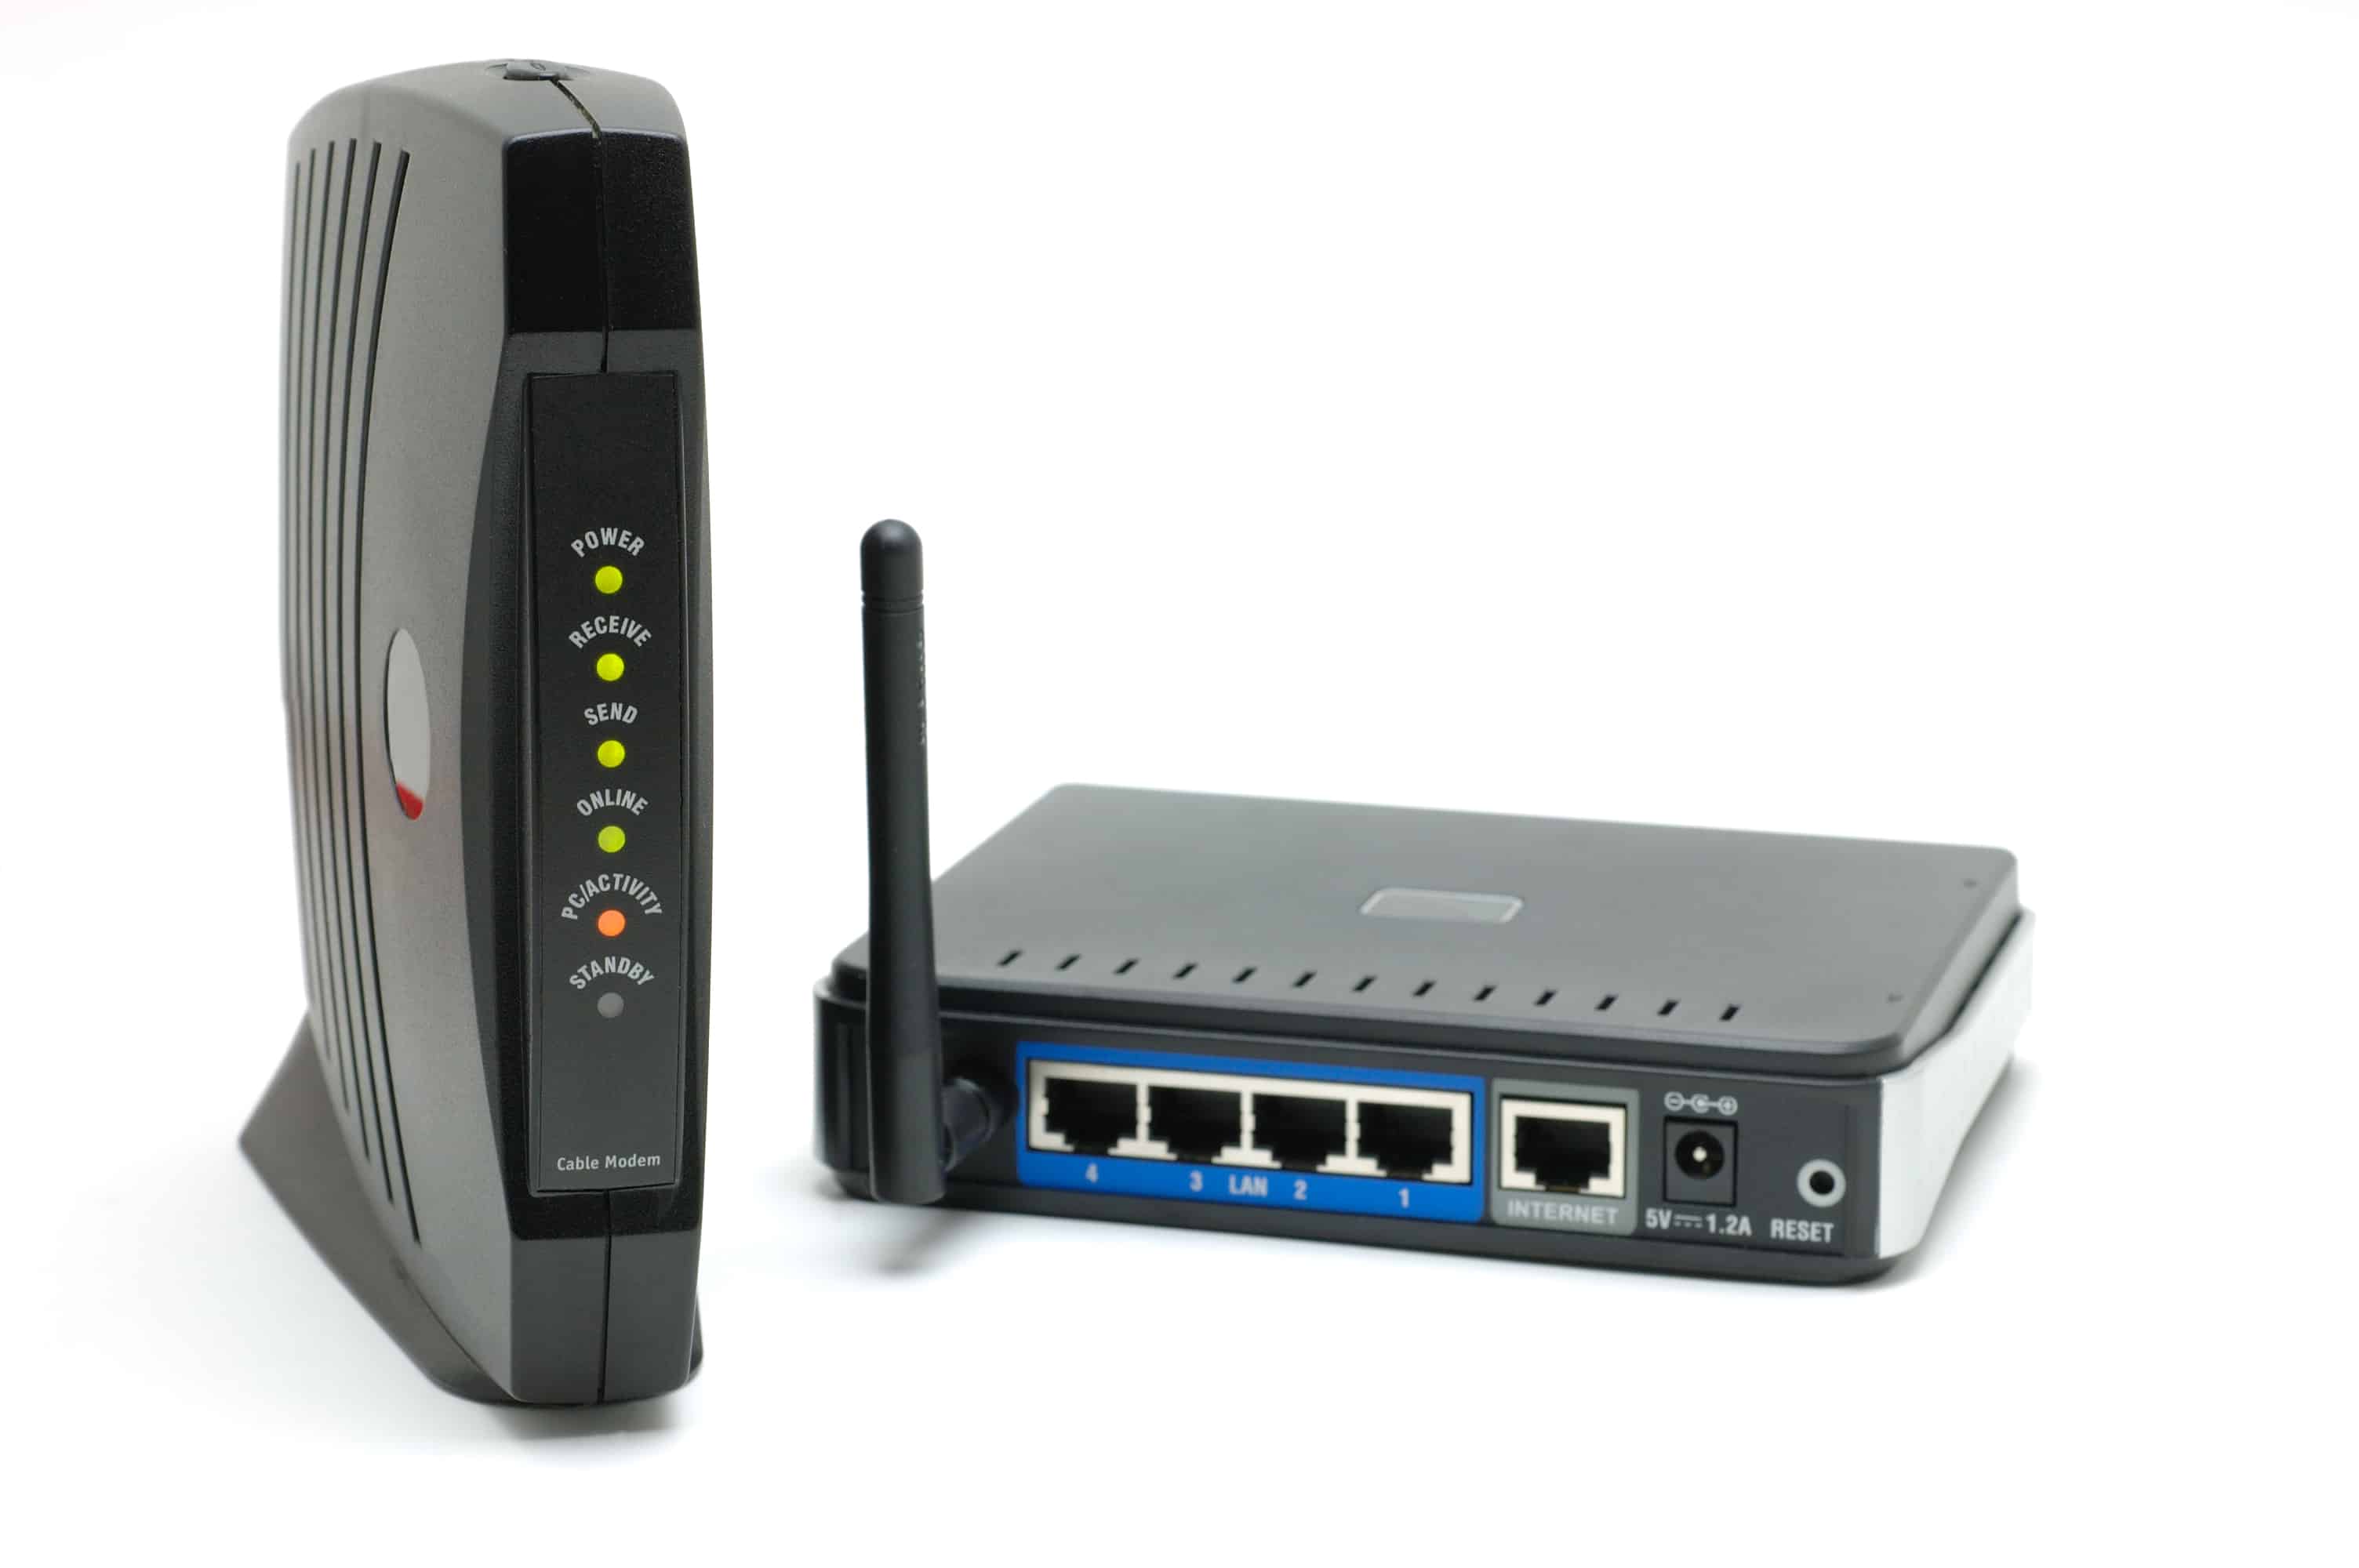 Which modems have been approved by Comcast?